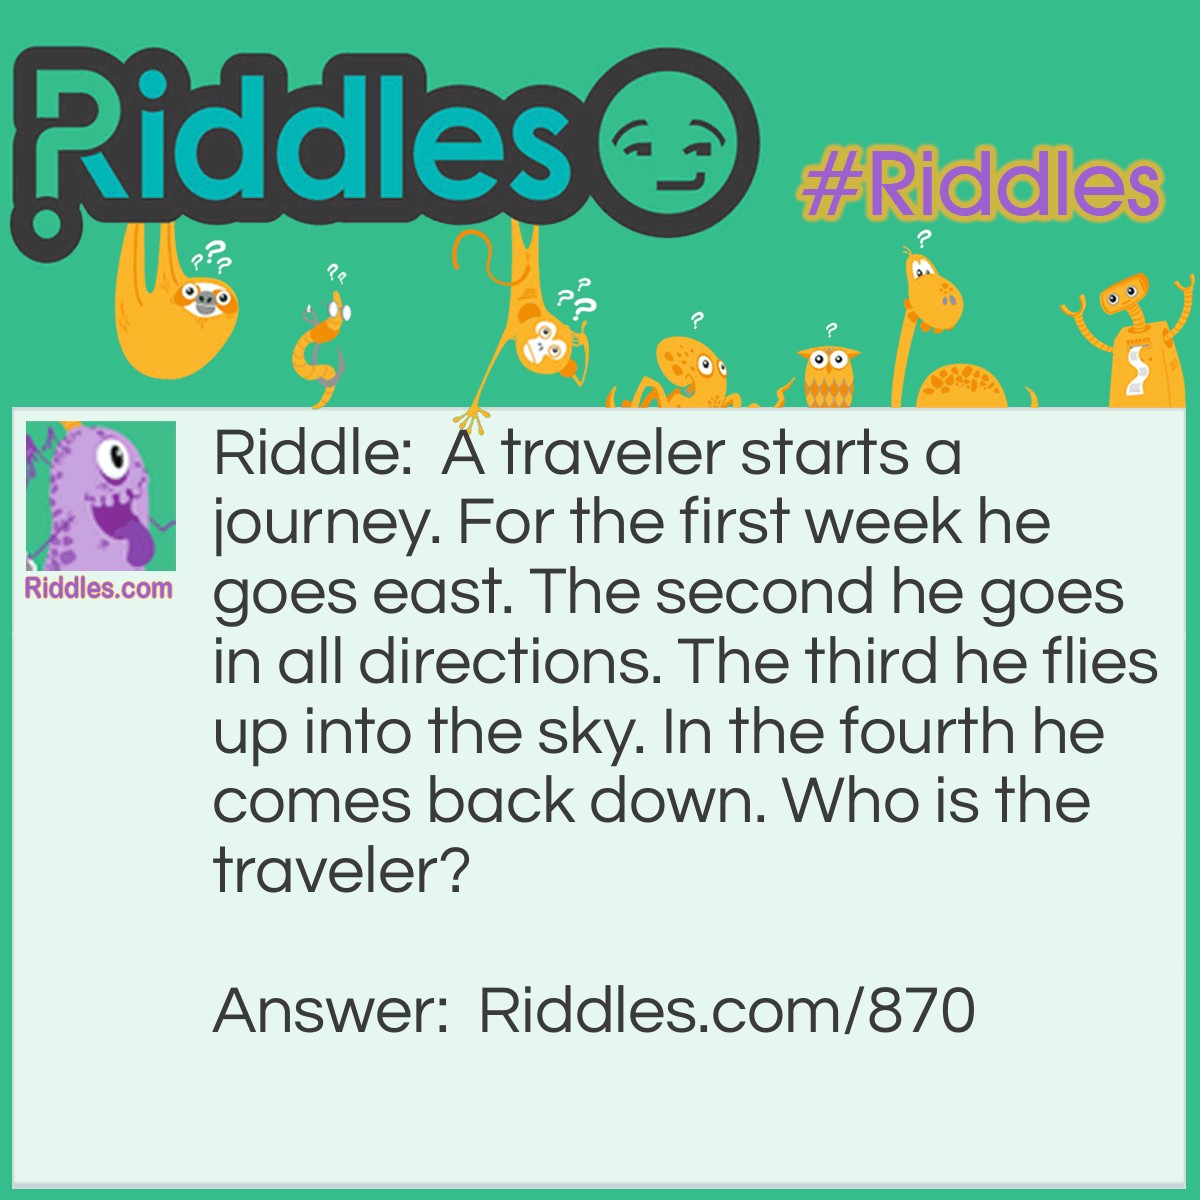 Riddle: A traveler starts a journey. For the first week he goes east. The second he goes in all directions. The third he flies up into the sky. In the fourth he comes back down. Who is the traveler? Answer: An iceberg. It travels East as an iceberg, free flowing water when melted, flies up to sky when evaporated, falls back down as rain.